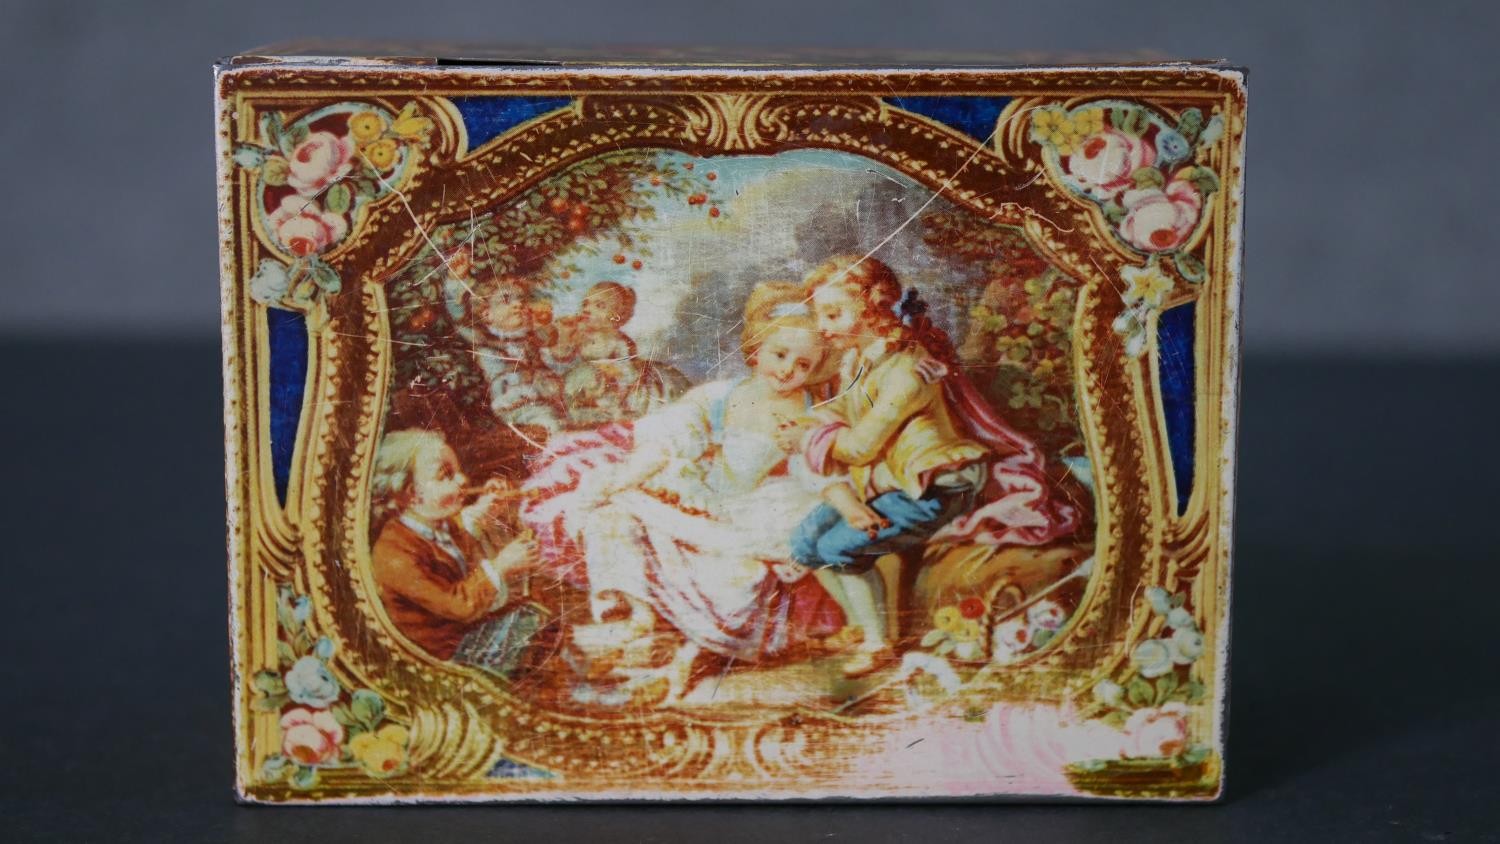 A tin plate vintage biscuit tin with classical figural design along with two olivewood boxes - Image 6 of 8